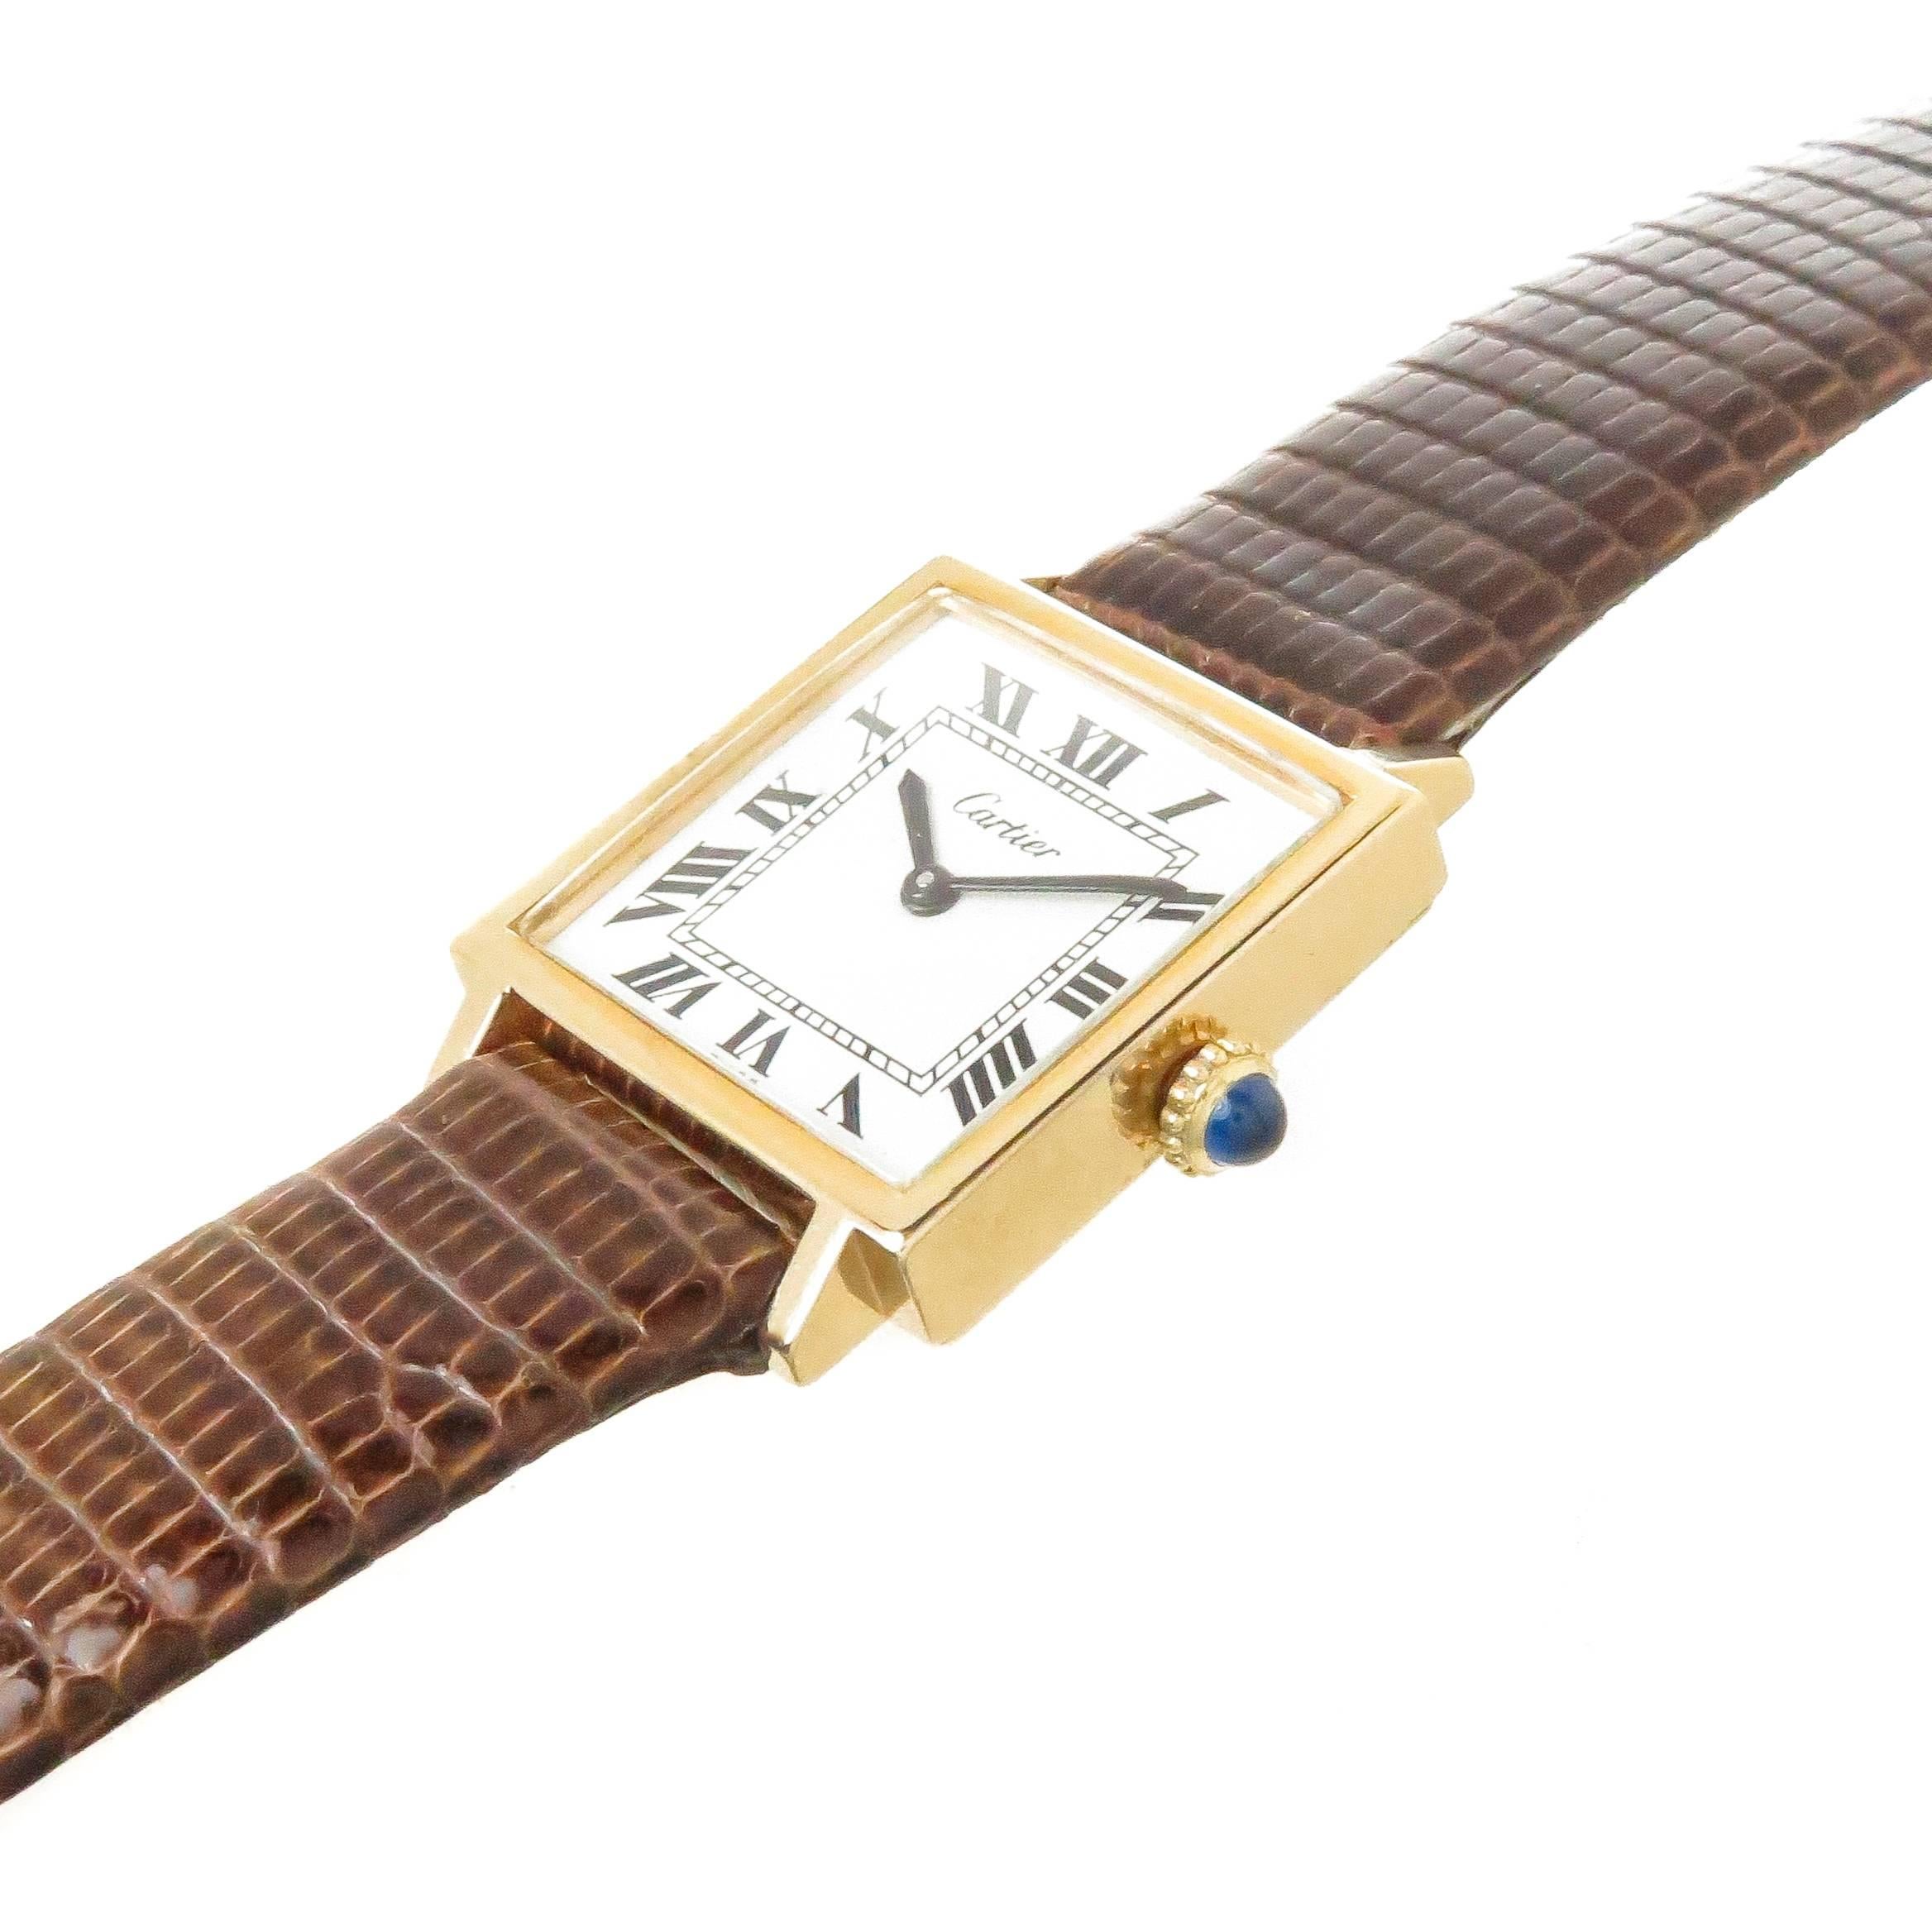 Circa 1970s Cartier Tank Wrist watch, 29 X 22 MM Gold Plate 2 piece case. Mechanical, manual wind 17 Jewel Cartier Movement. White Dial with Black Roman Numerals. New brown Lizard strap with Gold Plated Tang Buckle, watch length 8 1/4 inches.. 